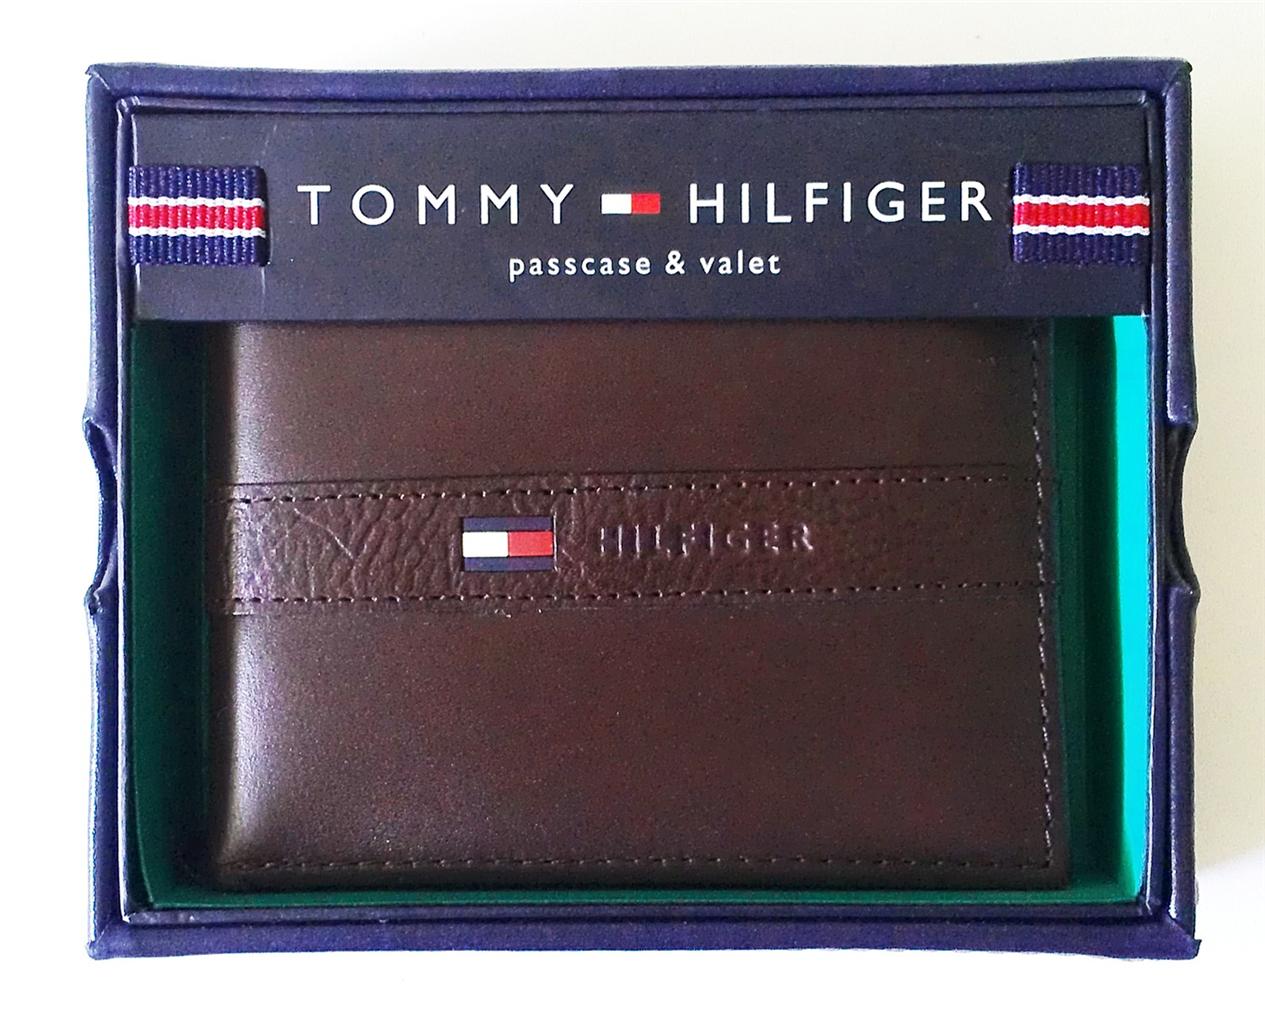 NEW TOMMY HILFIGER MEN'S GENUINE LEATHER CREDIT CARD WALLET PASSCASE BILLFOLD - Picture 1 of 1